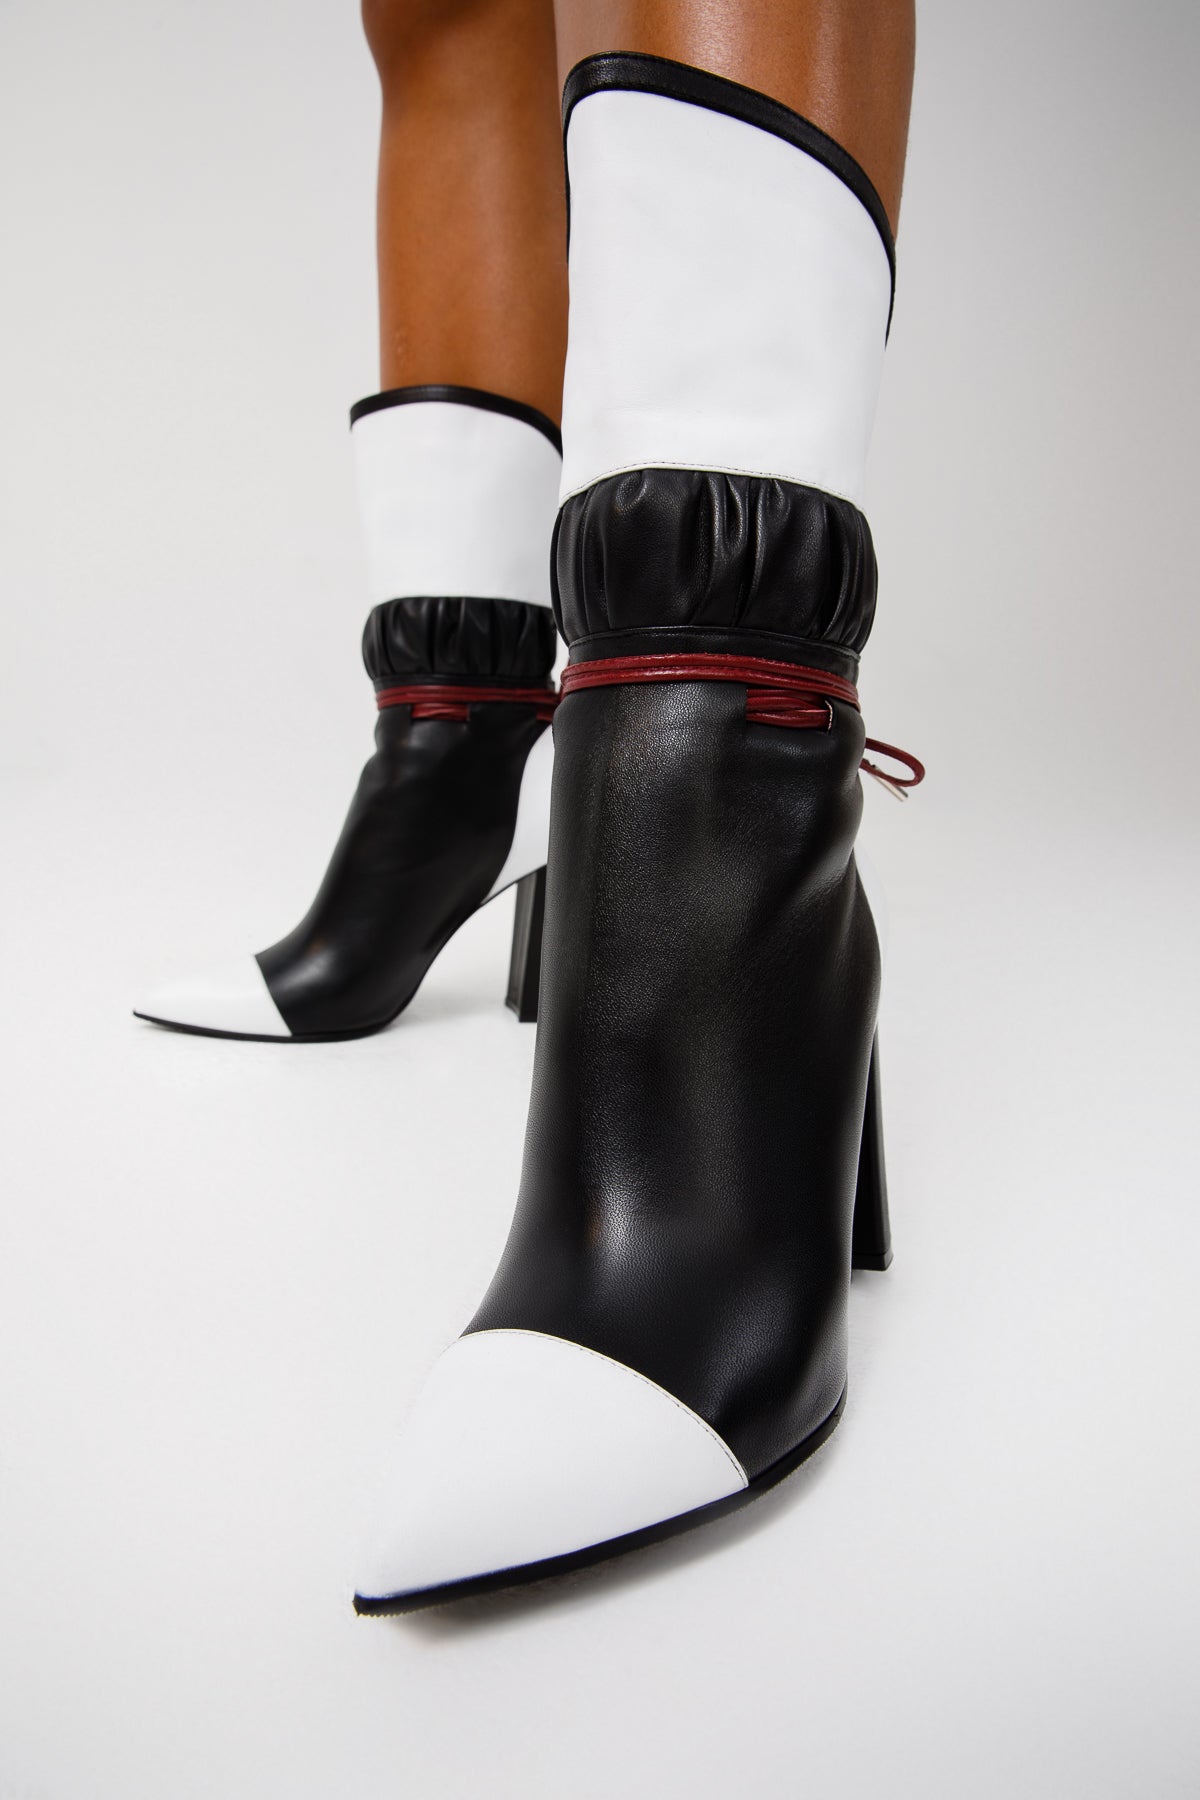 The Lucca Black & White Leather Mid Calf High Heel Women Boot Limited Edition